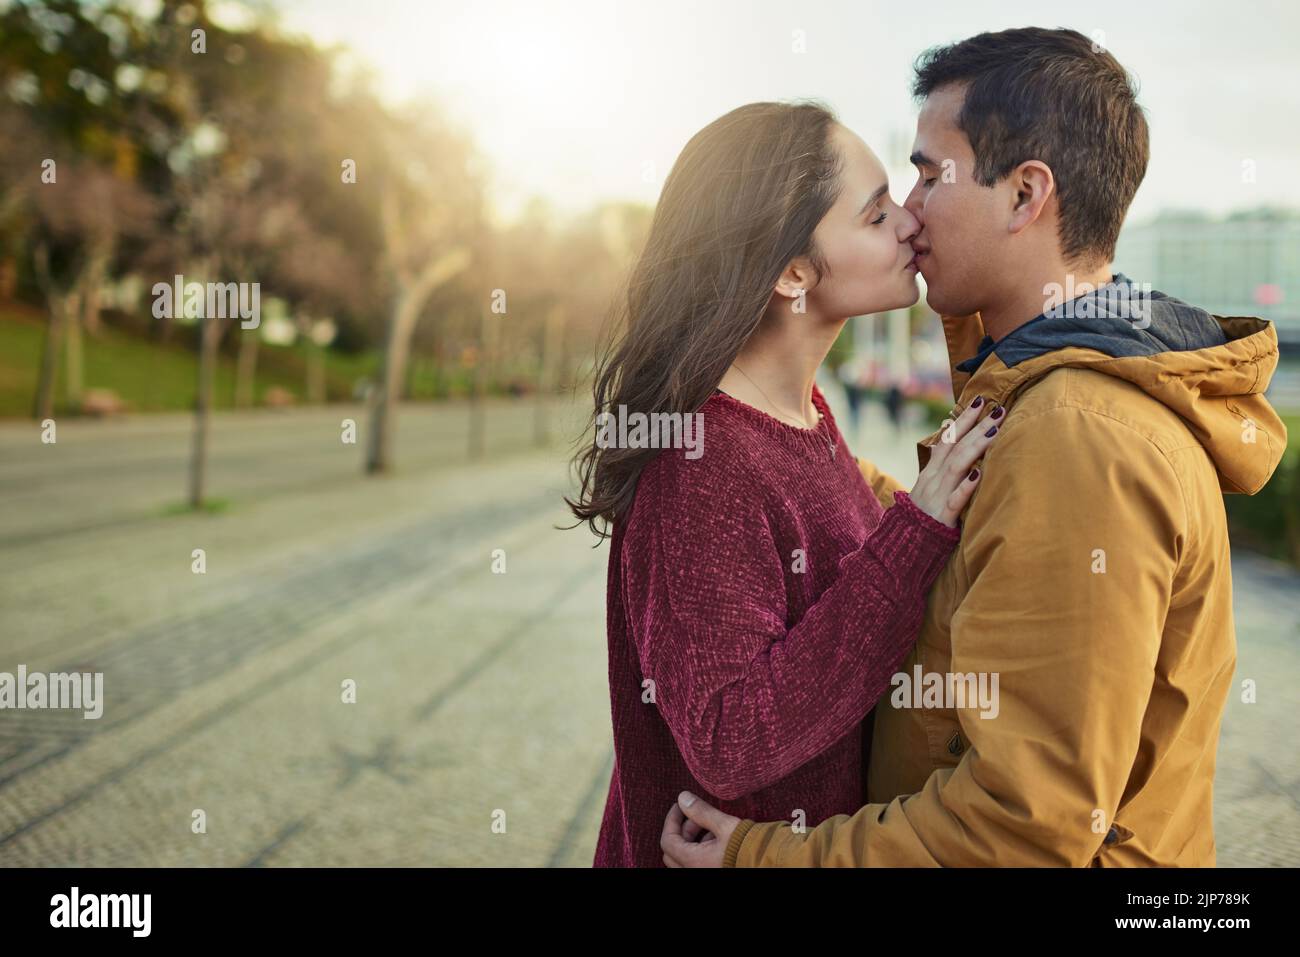 Those I want you forever kisses. a happy young couple kissing each other outdoors. Stock Photo